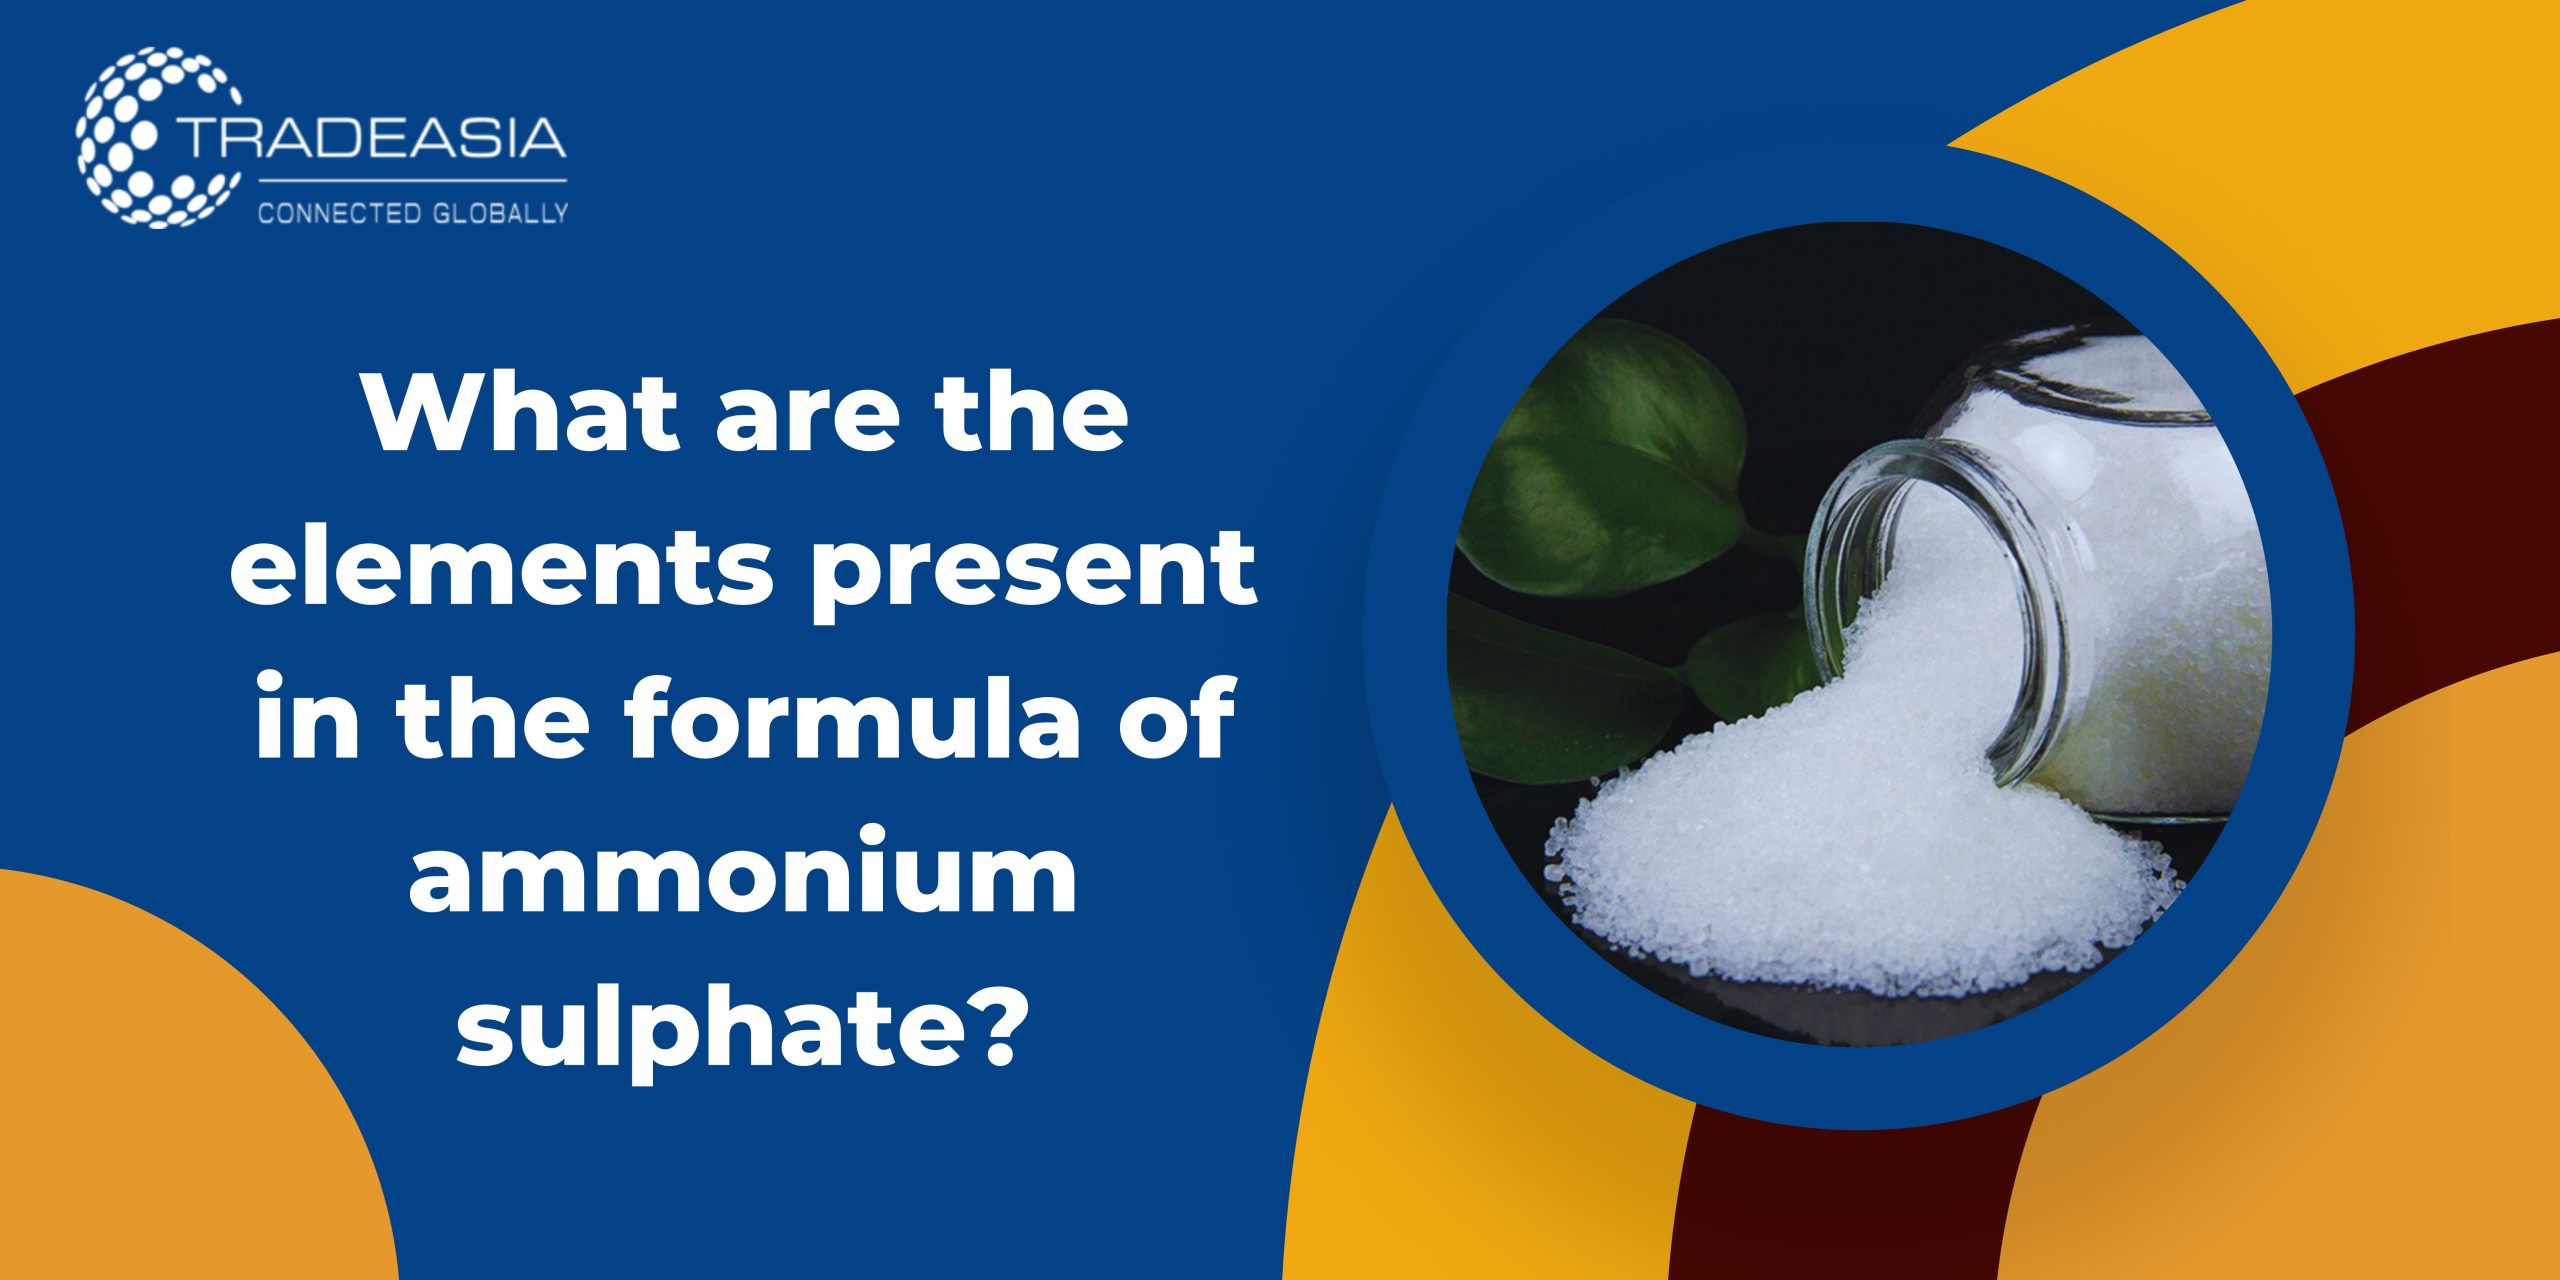 What are the elements present in the formula of ammonium sulphate?